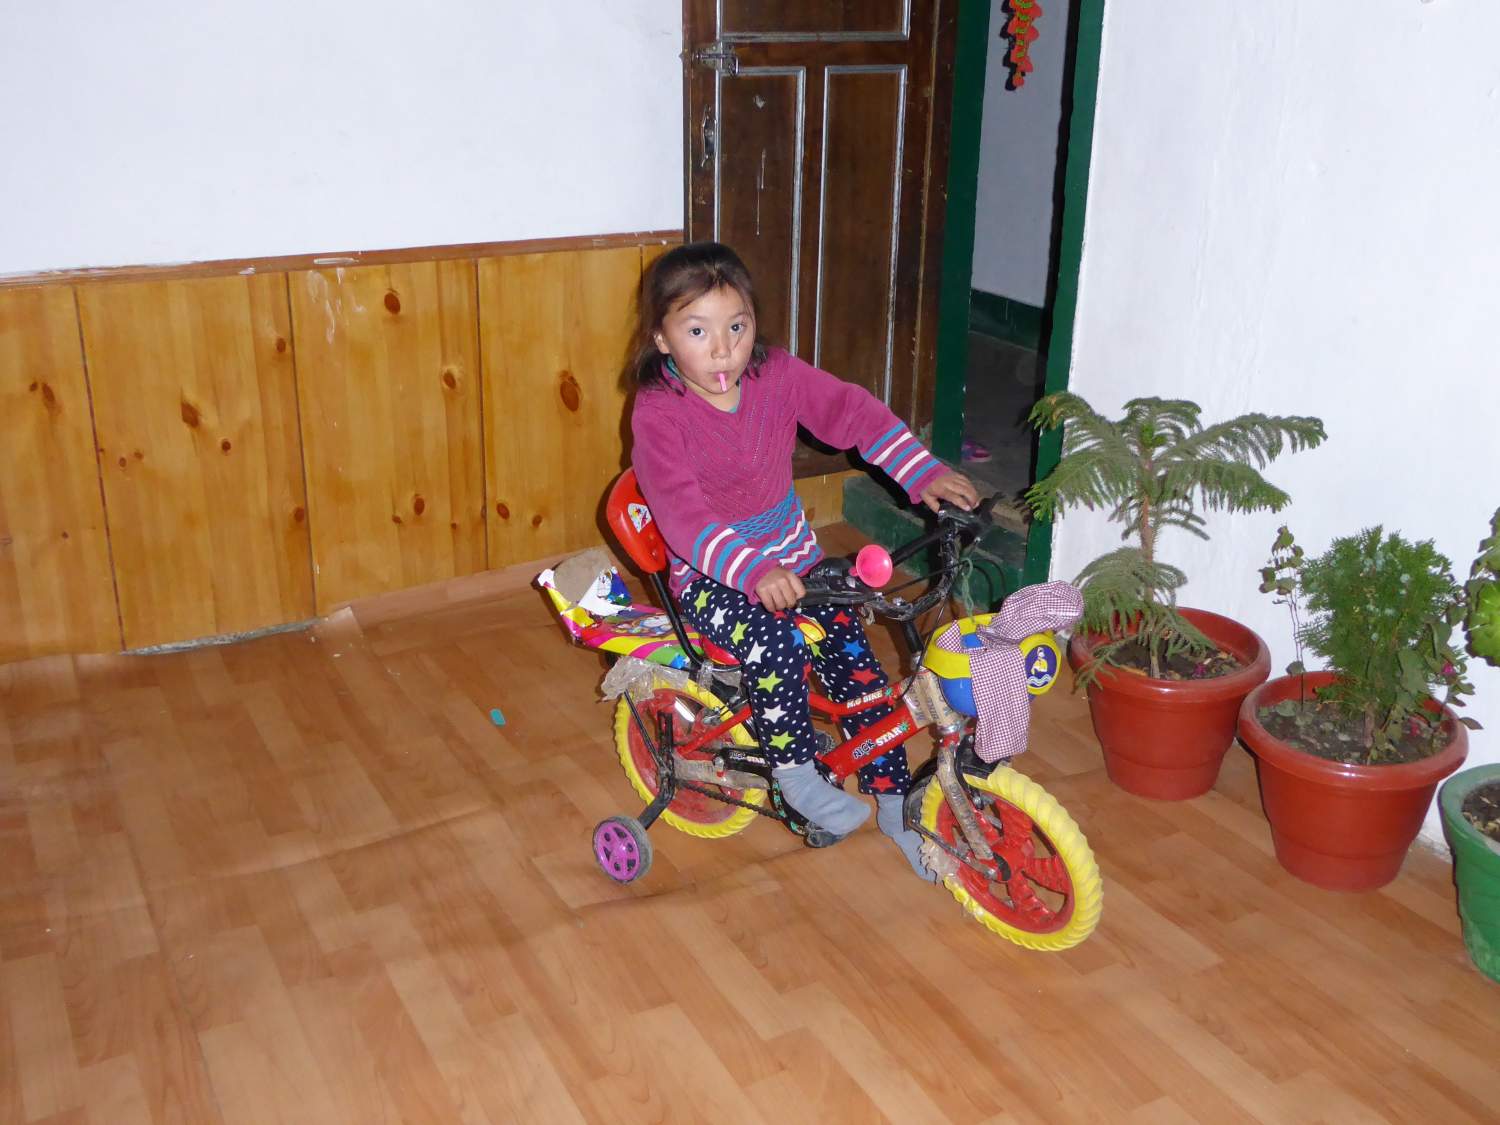 Cycling in the living room